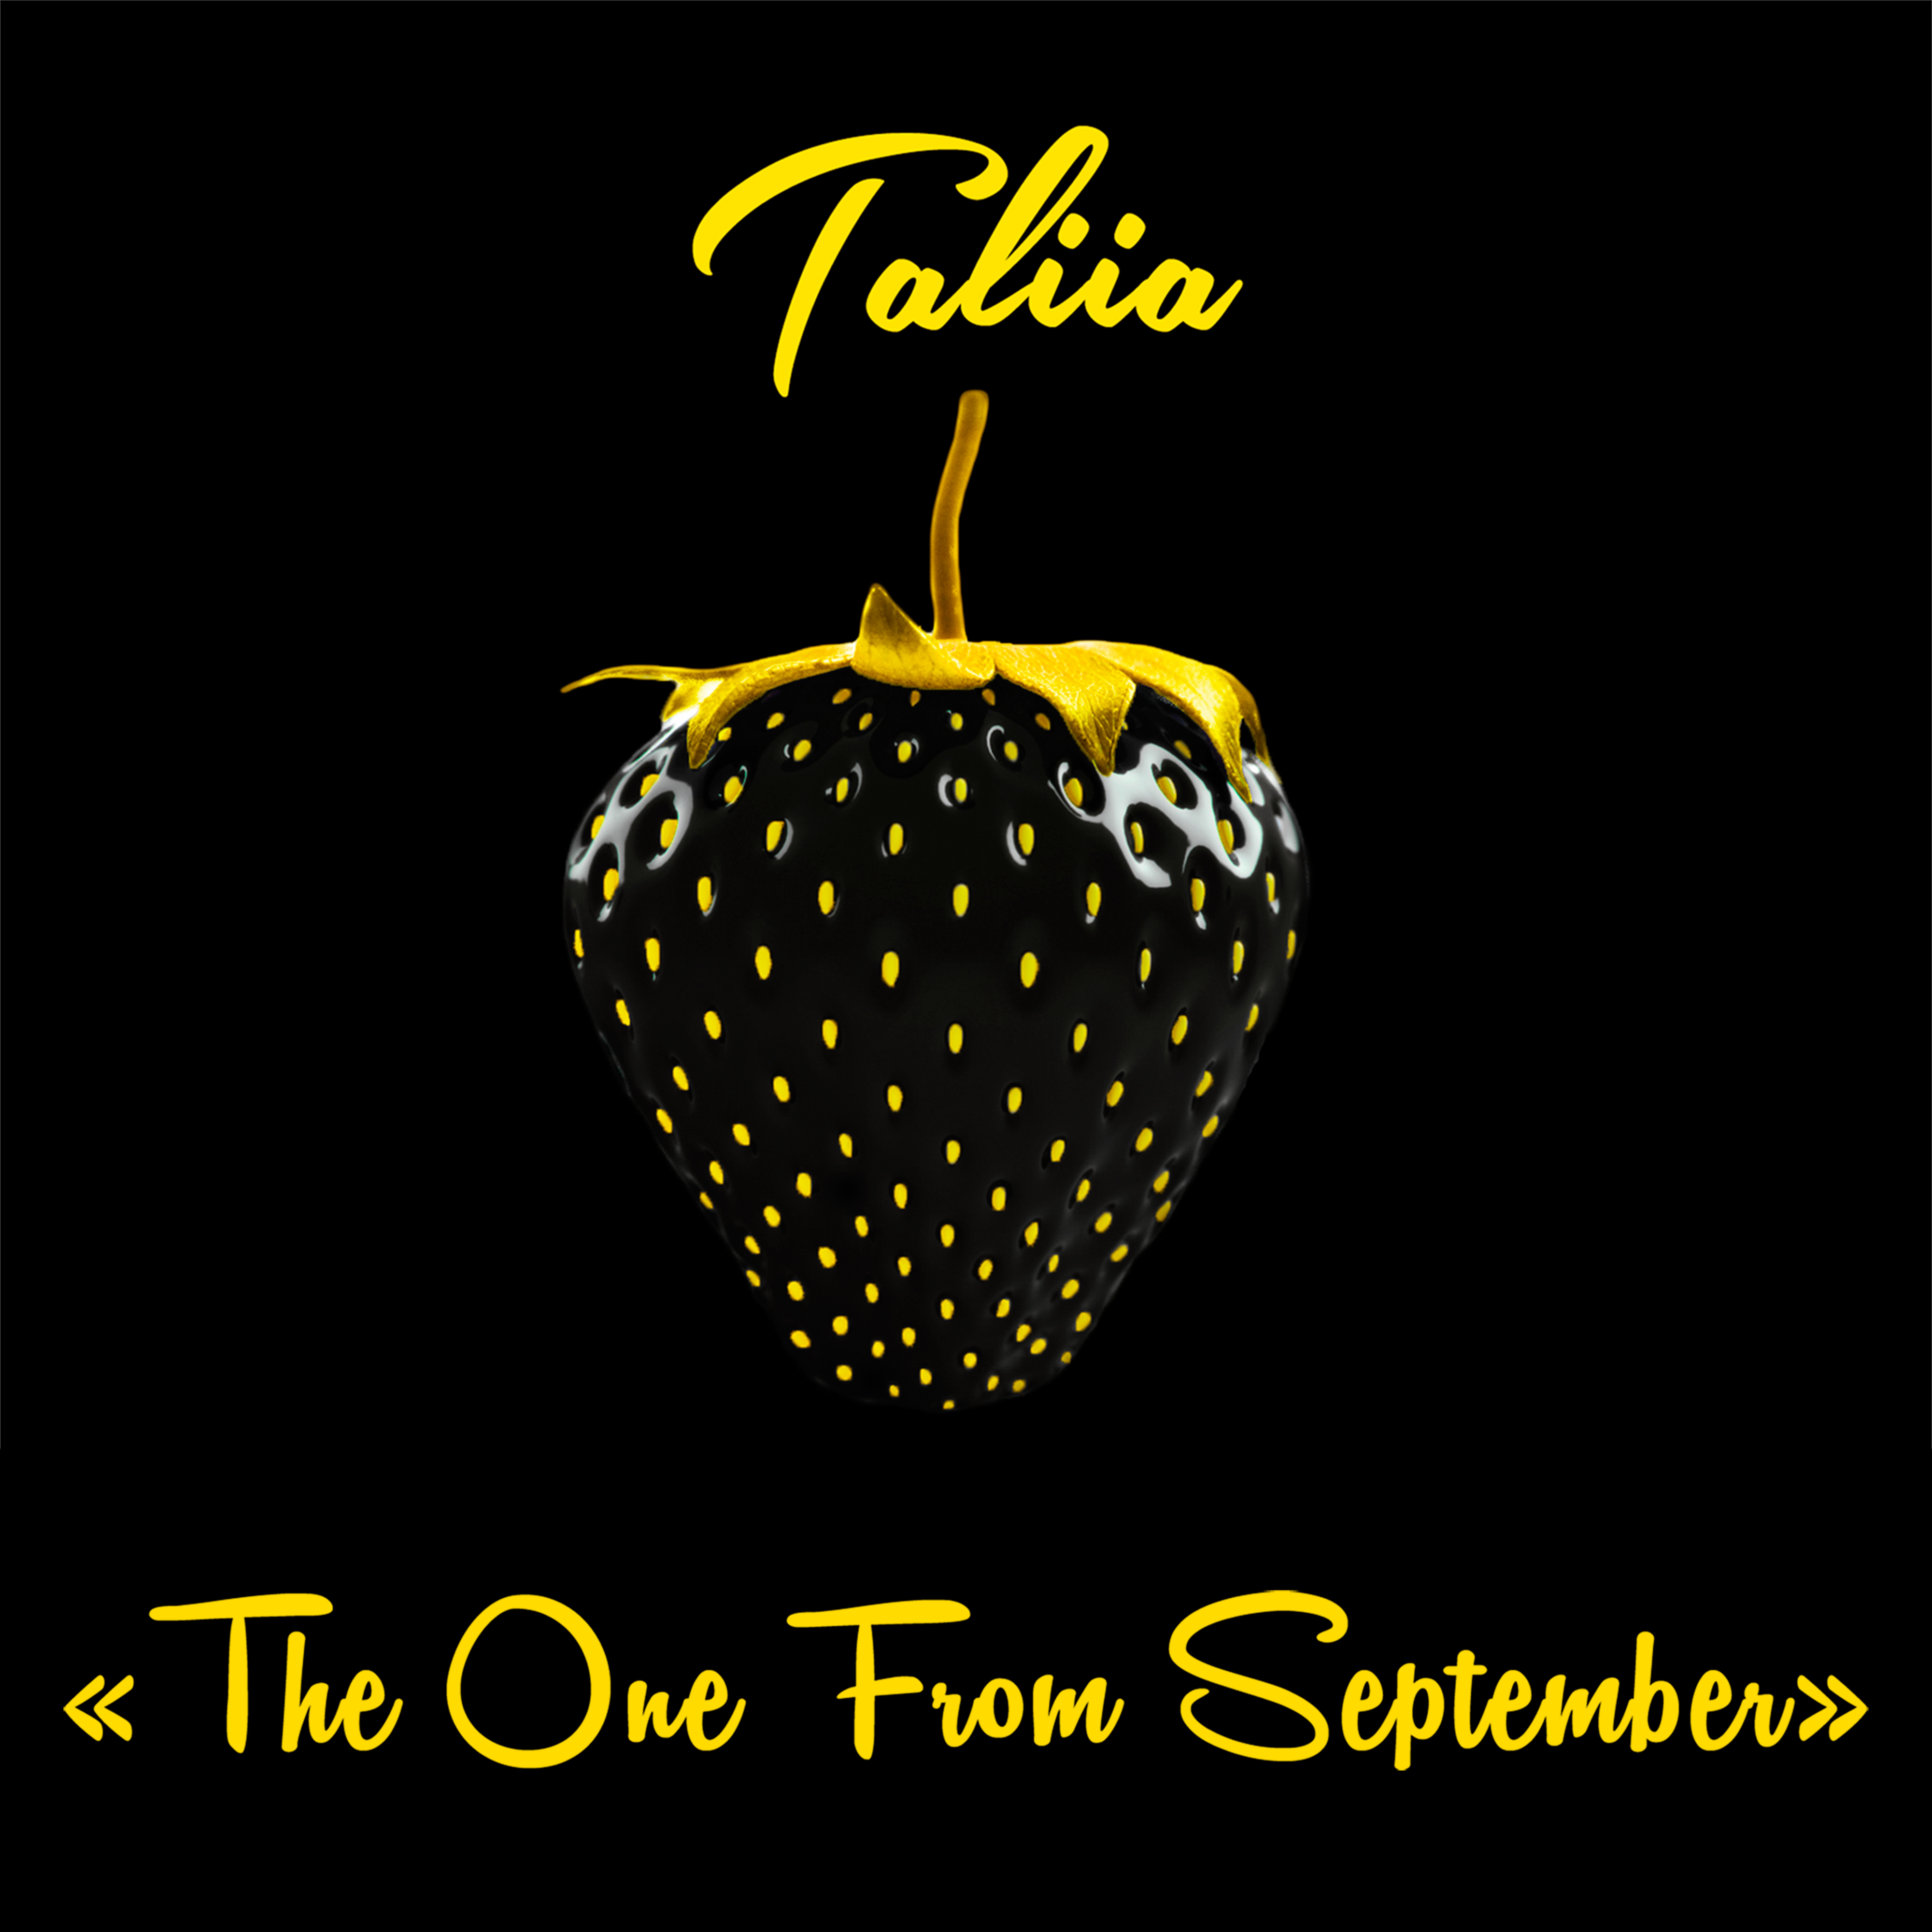 EP “The One From September”